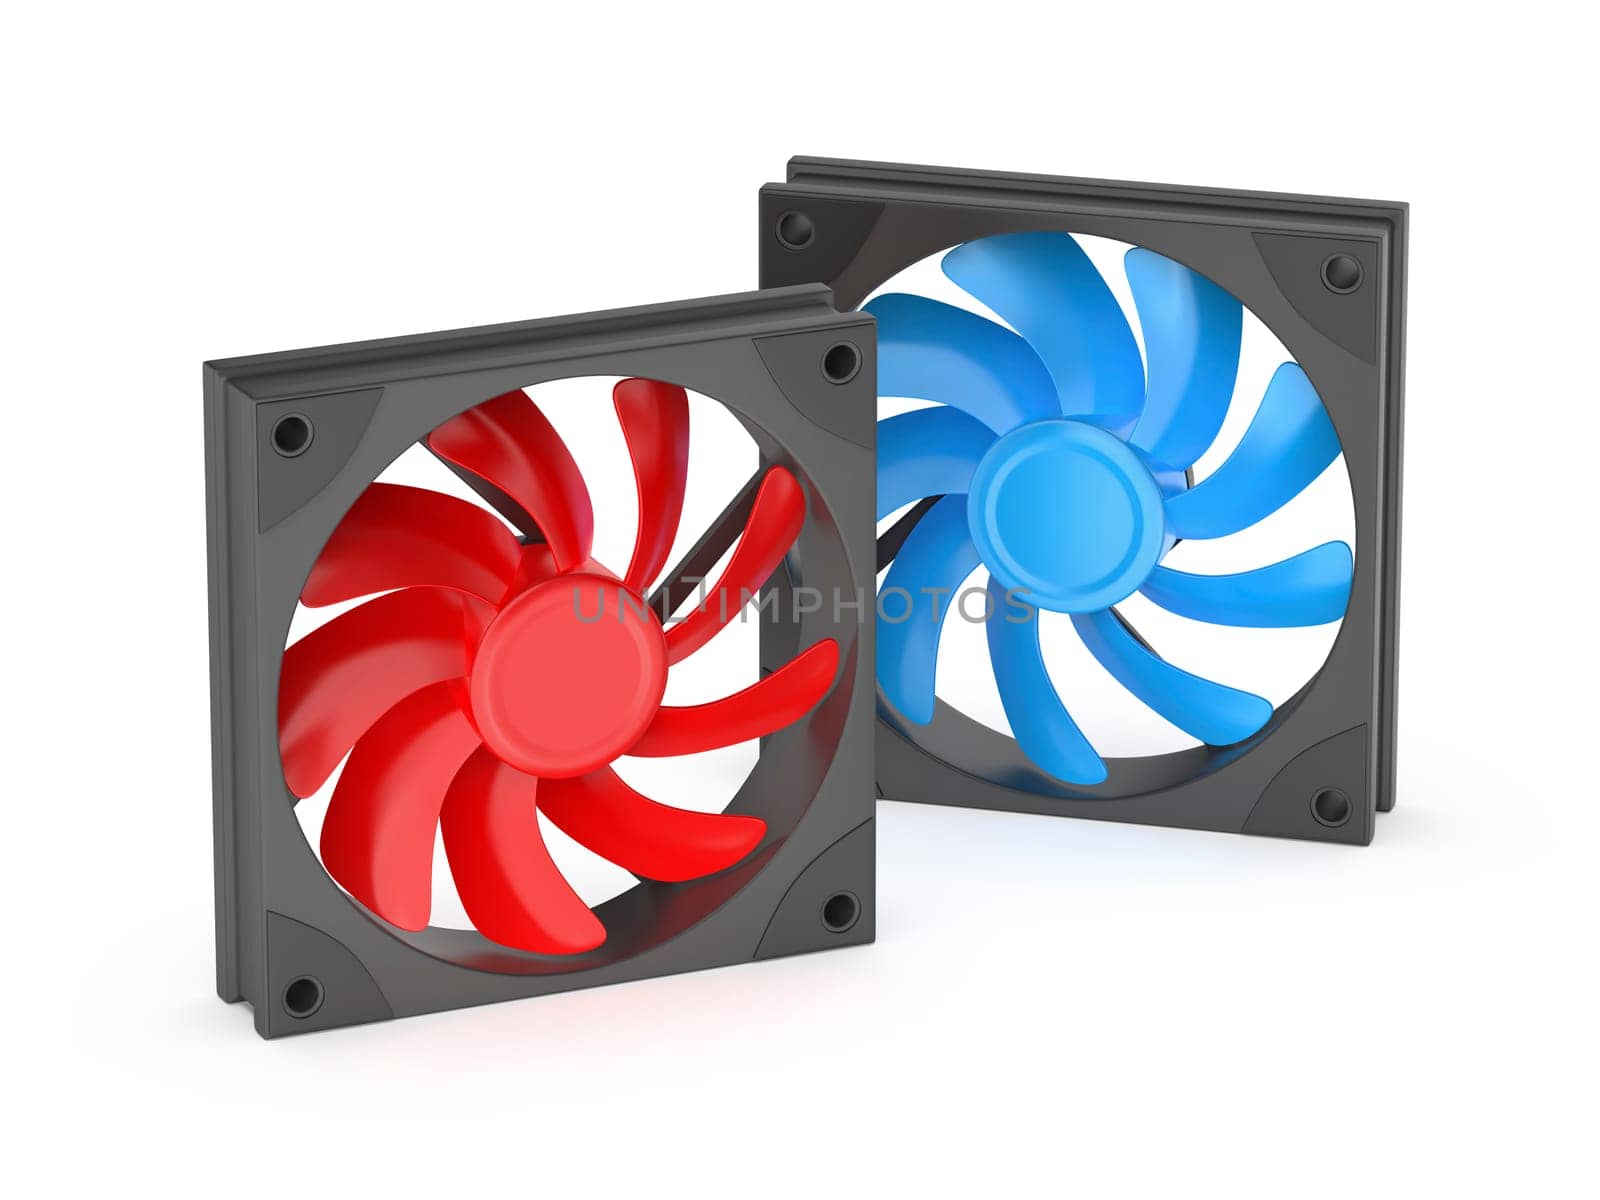 Red and blue computer case fans by magraphics